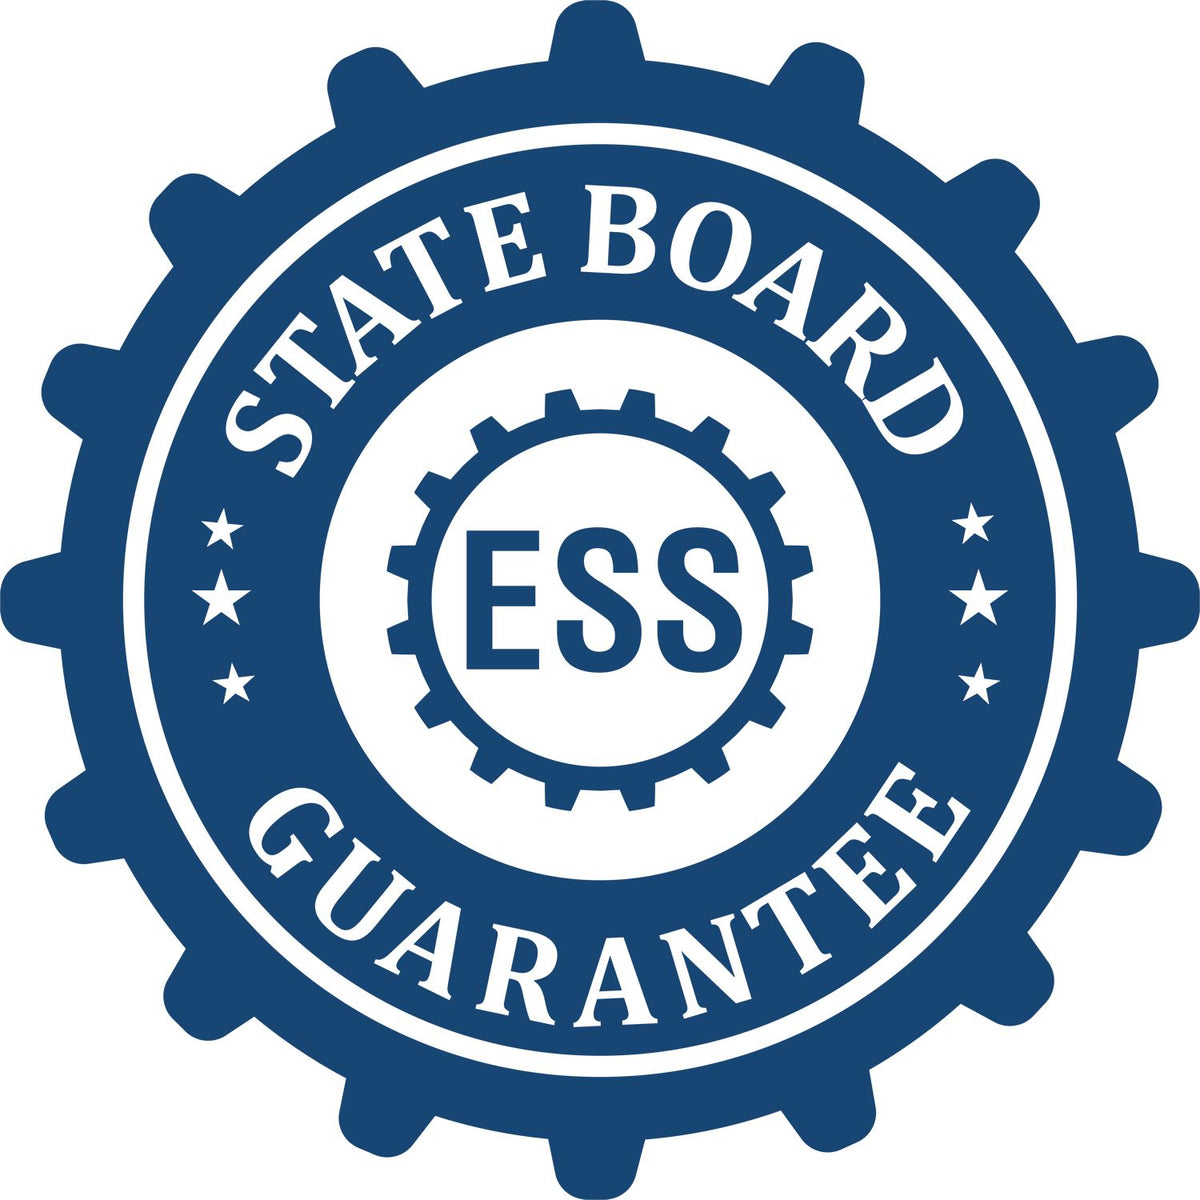 An emblem in a gear shape illustrating a state board guarantee for the Gift Maine Engineer Seal